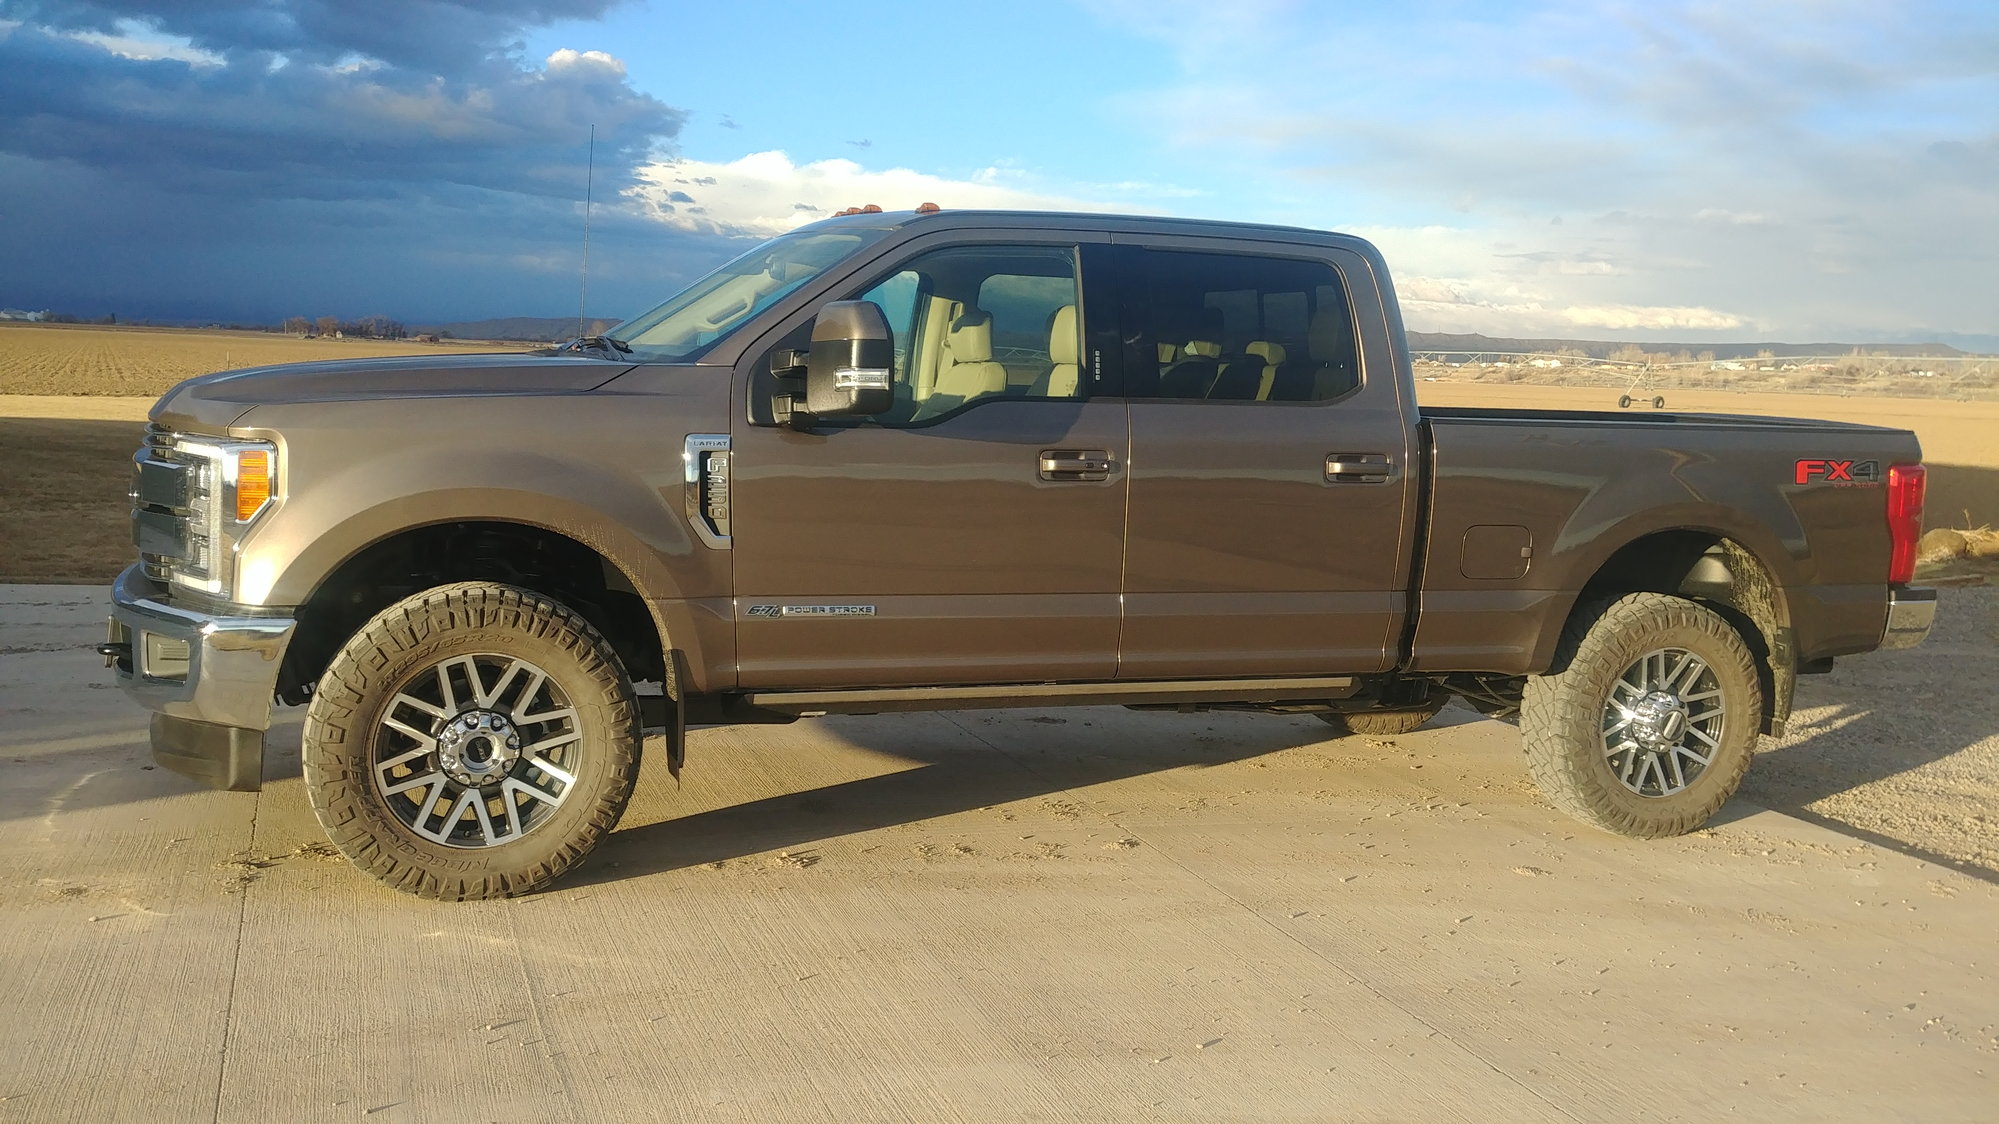 Stone Gray - Page 2 - Ford Truck Enthusiasts Forums